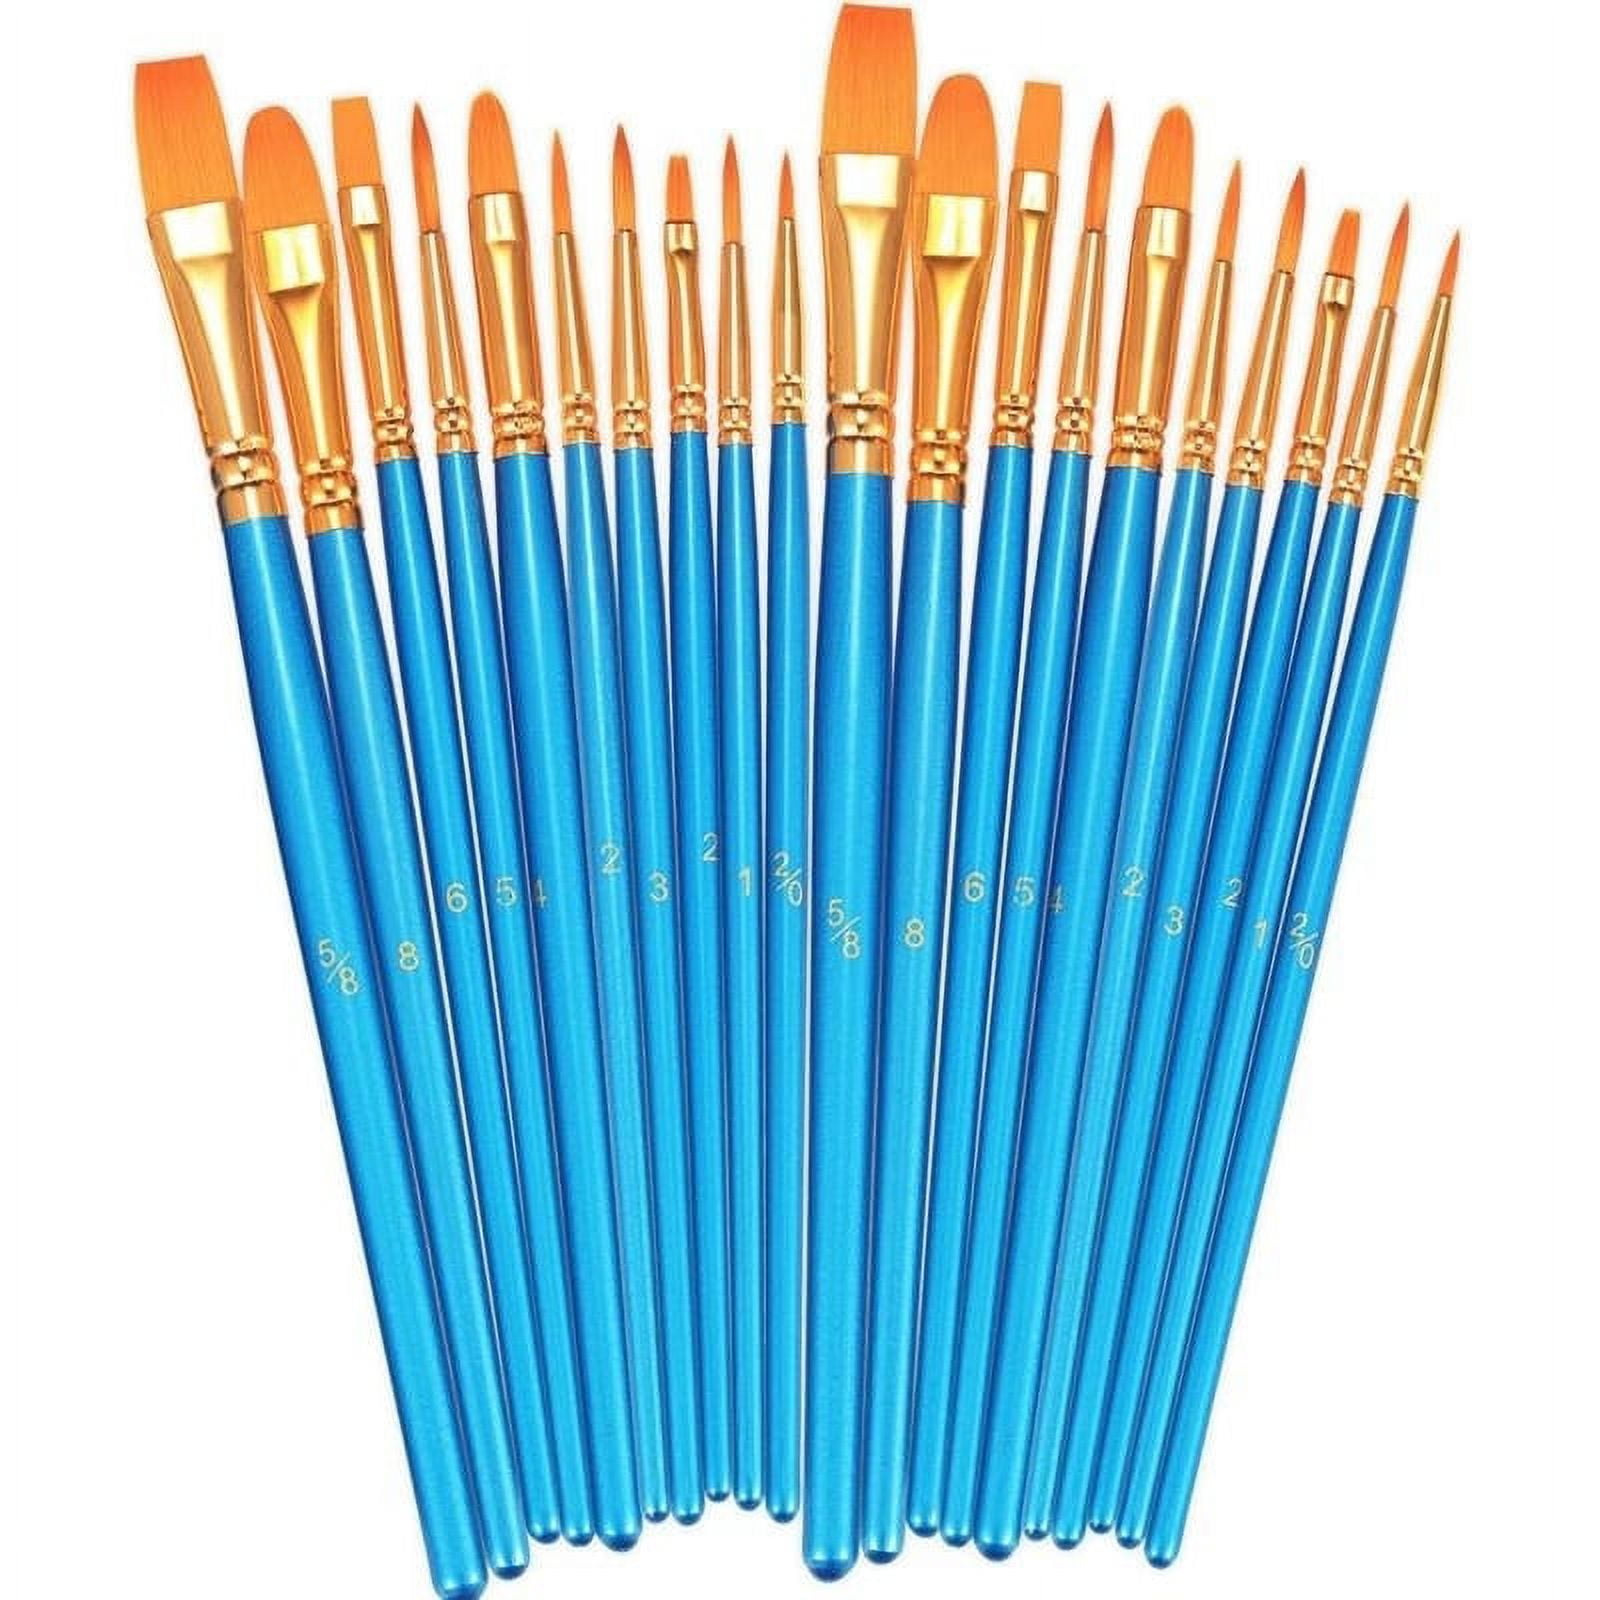 12Pc Small-Large ROUND TIPPED ARTIST PAINT BRUSH SET 1-12mm  Priming/Decorating